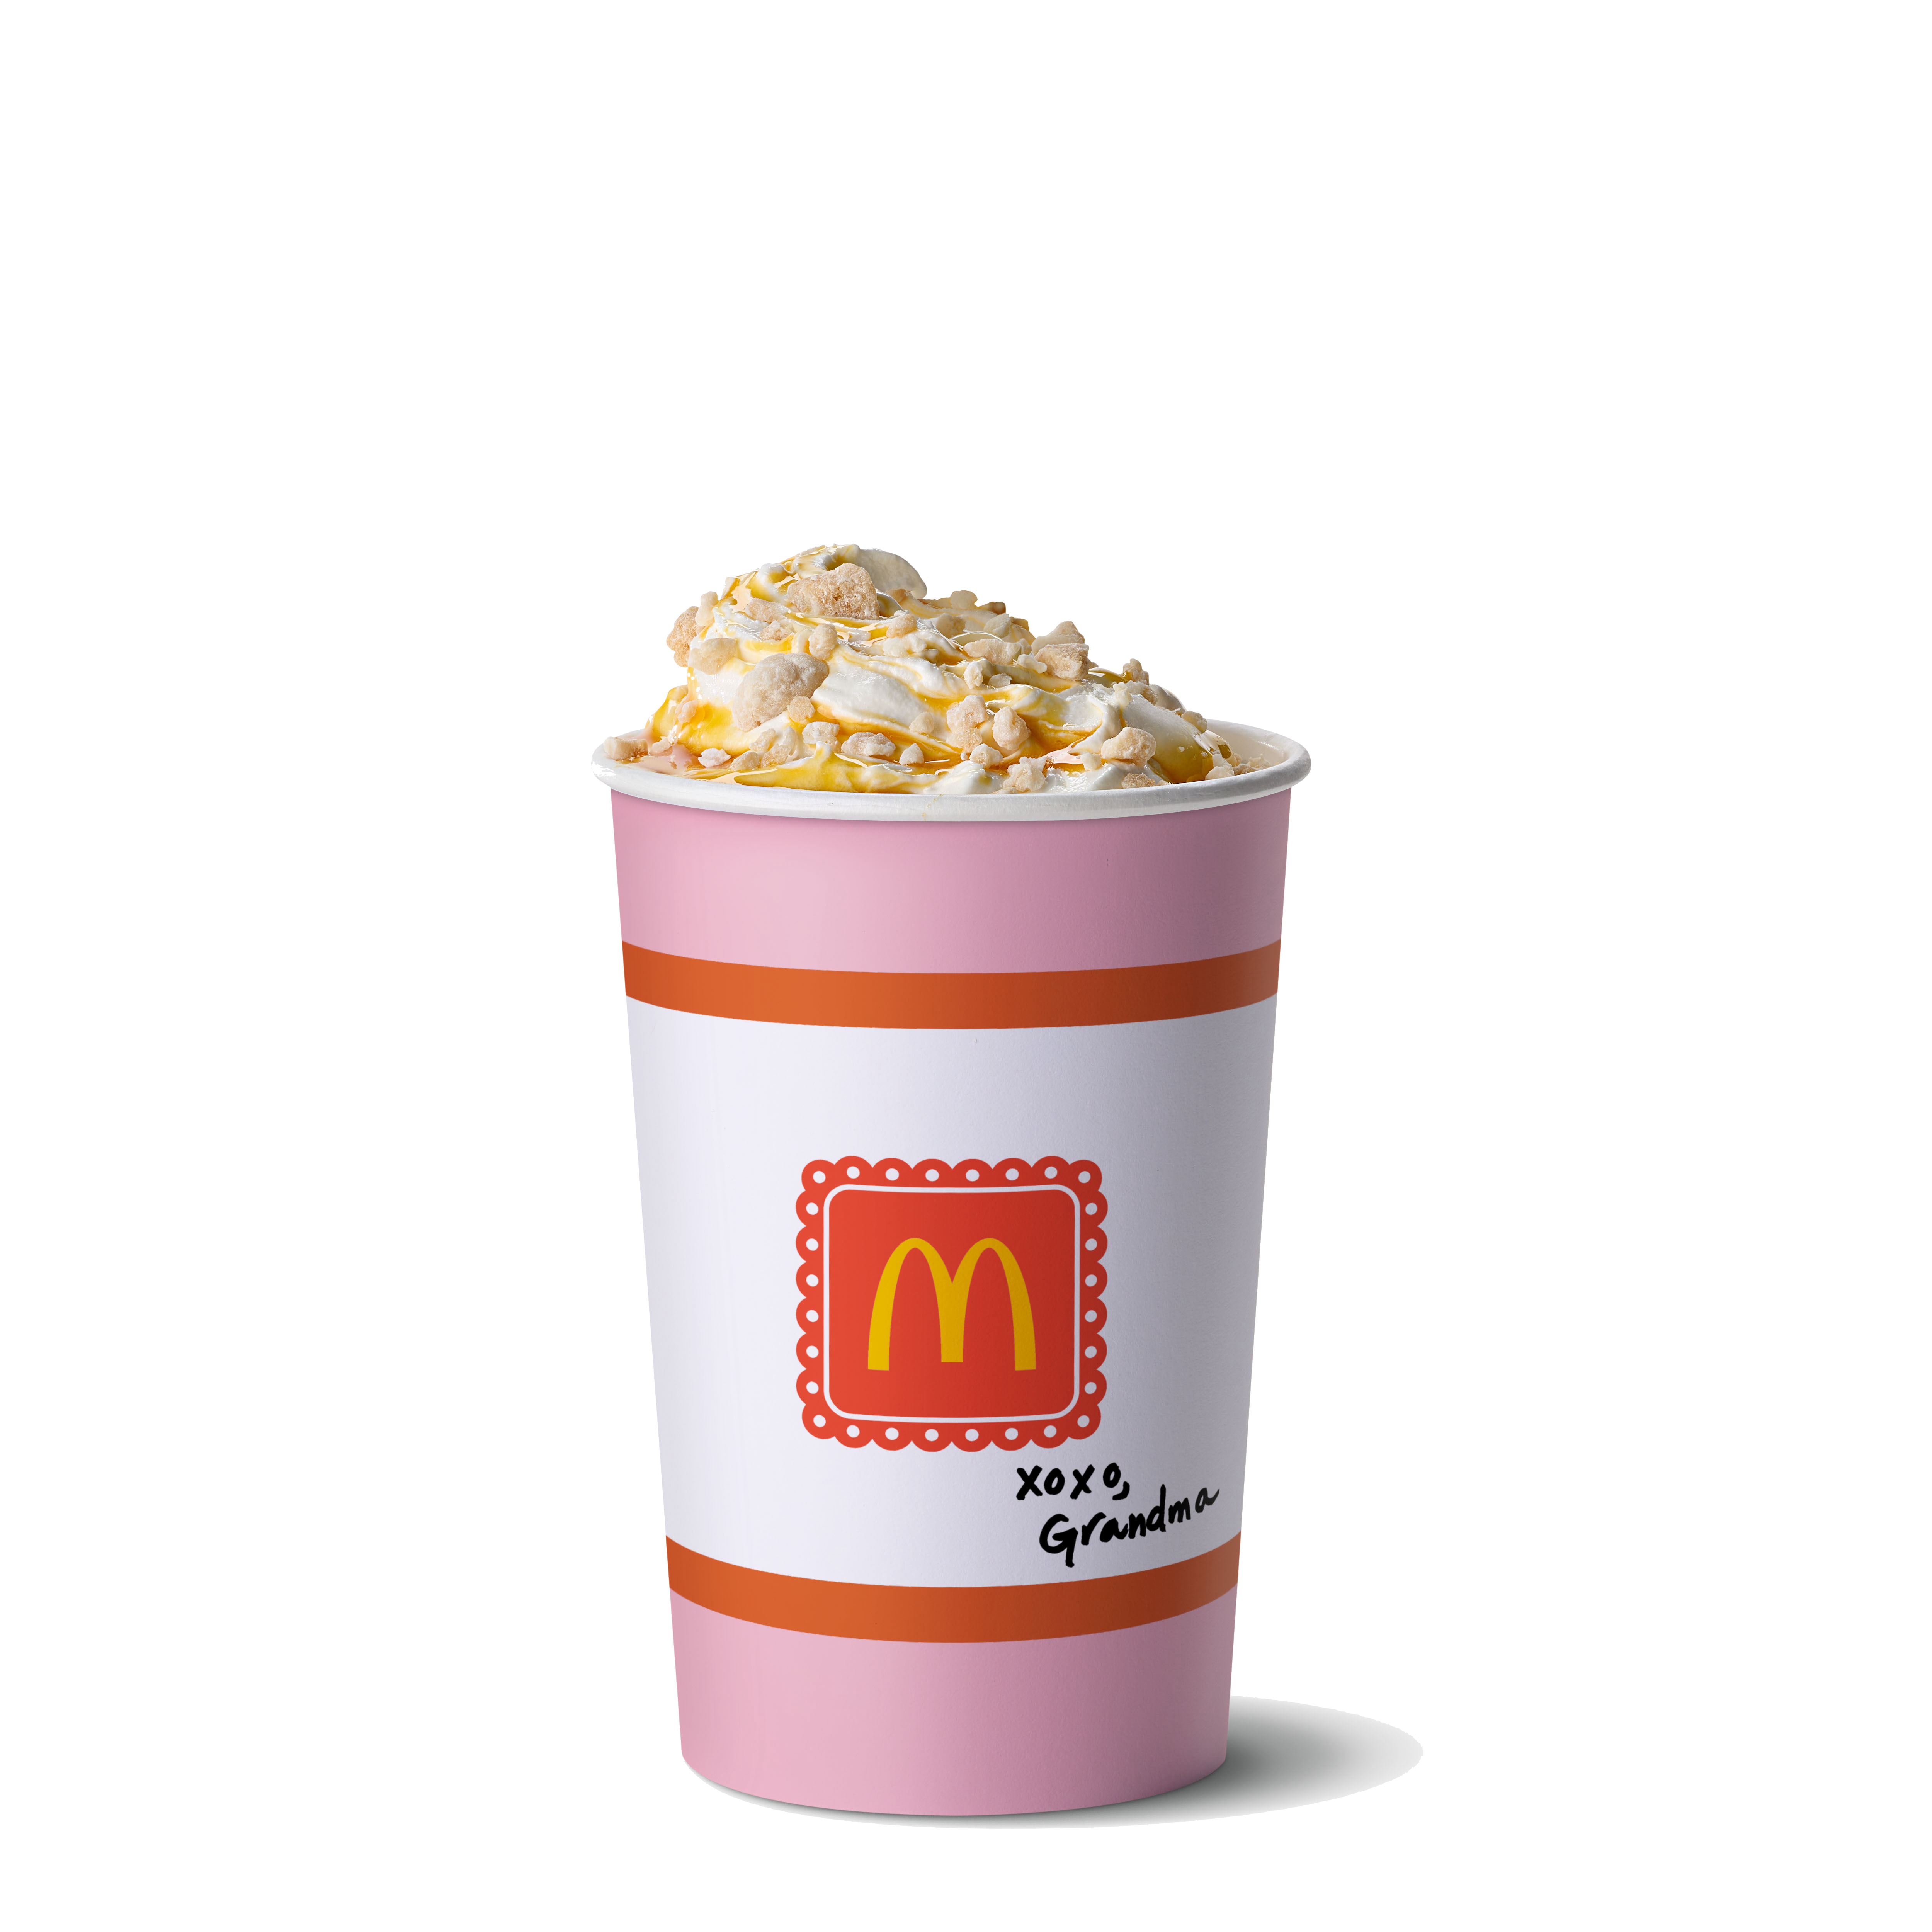 McDonald's is creating a new McFlurry inspired by grandmas. Here's what is in it